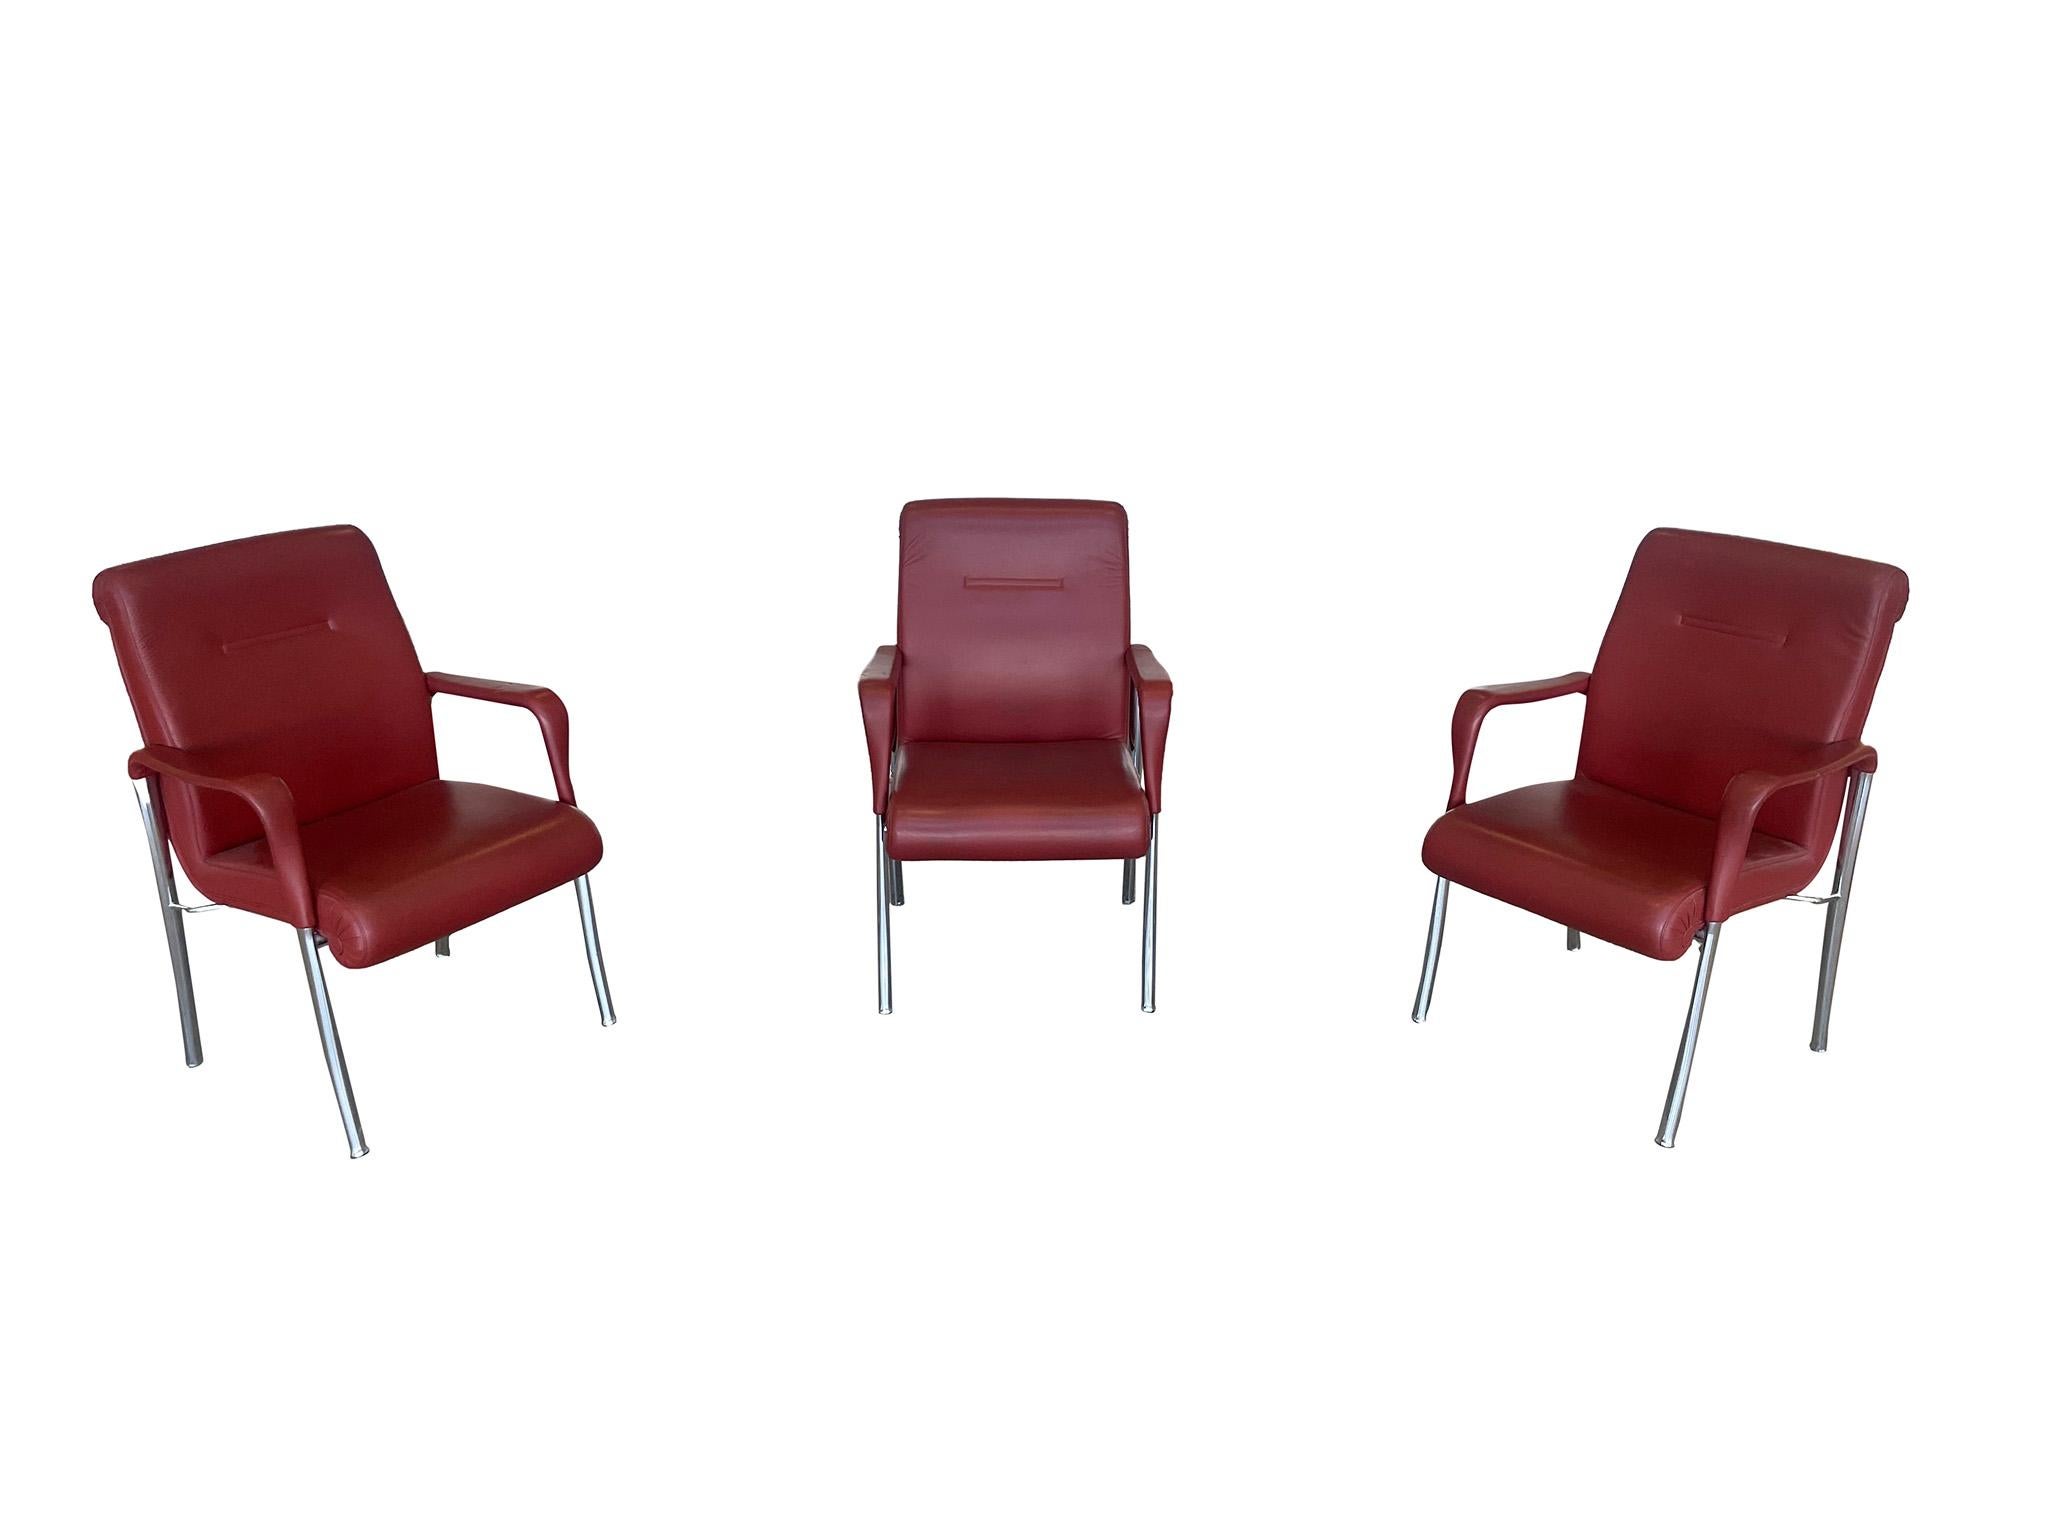 Three fabulous dining or office chairs by iconic Italian chair maker Poltrona Frau. Characterized by the quality of leather, craftsmanship, and open spiral edges that is common throughout Poltrona Frau pieces. Crafted in Oxblood Red leather with